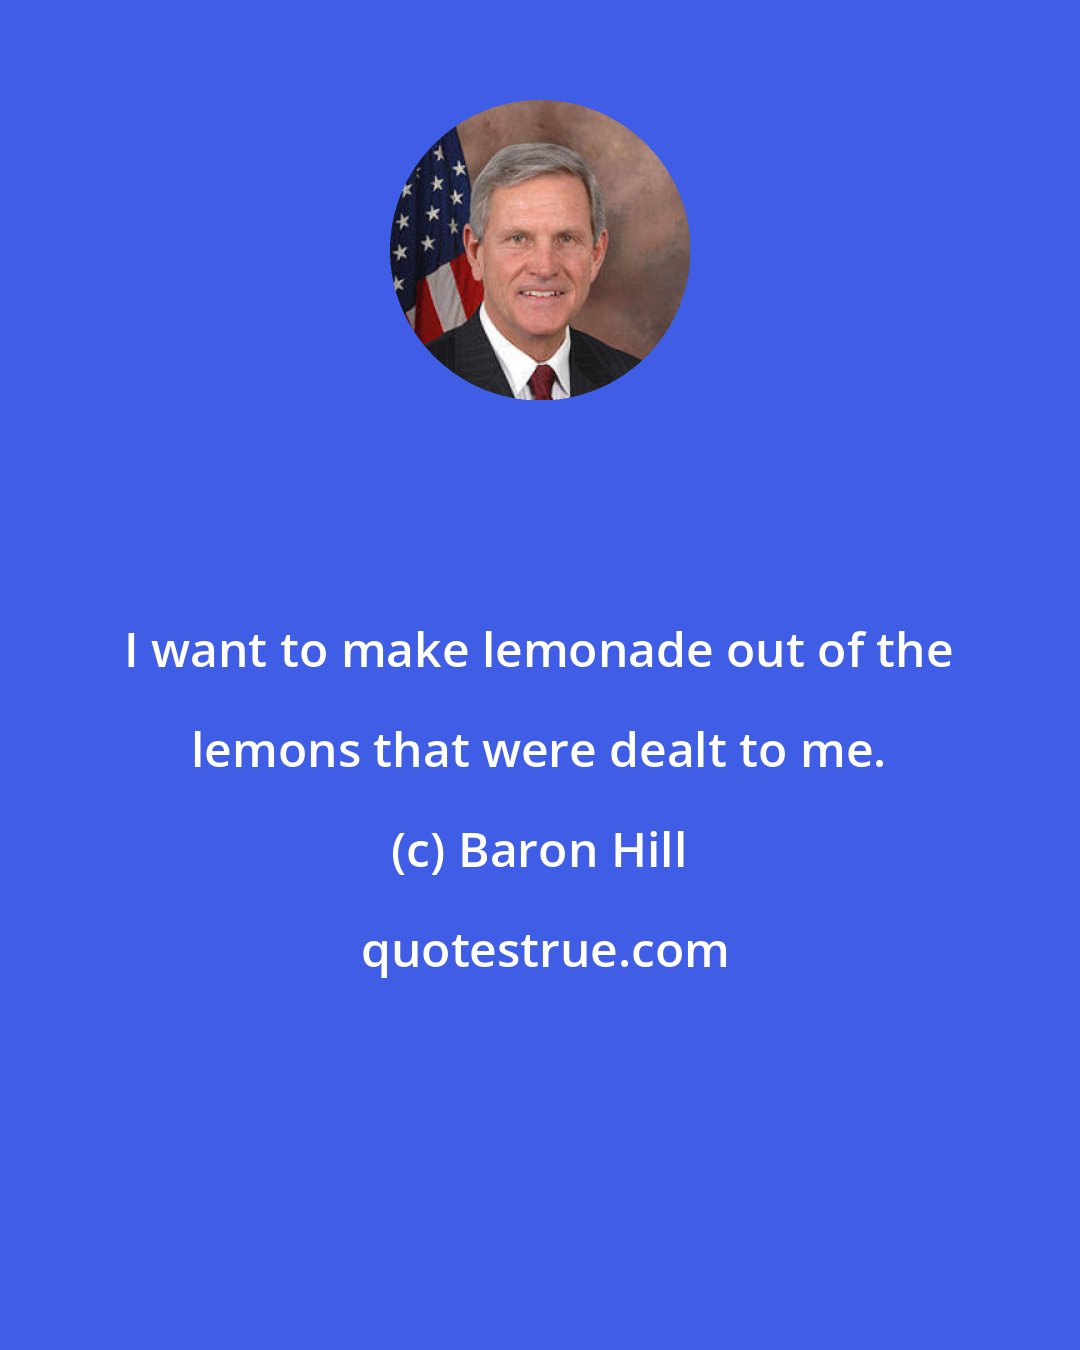 Baron Hill: I want to make lemonade out of the lemons that were dealt to me.